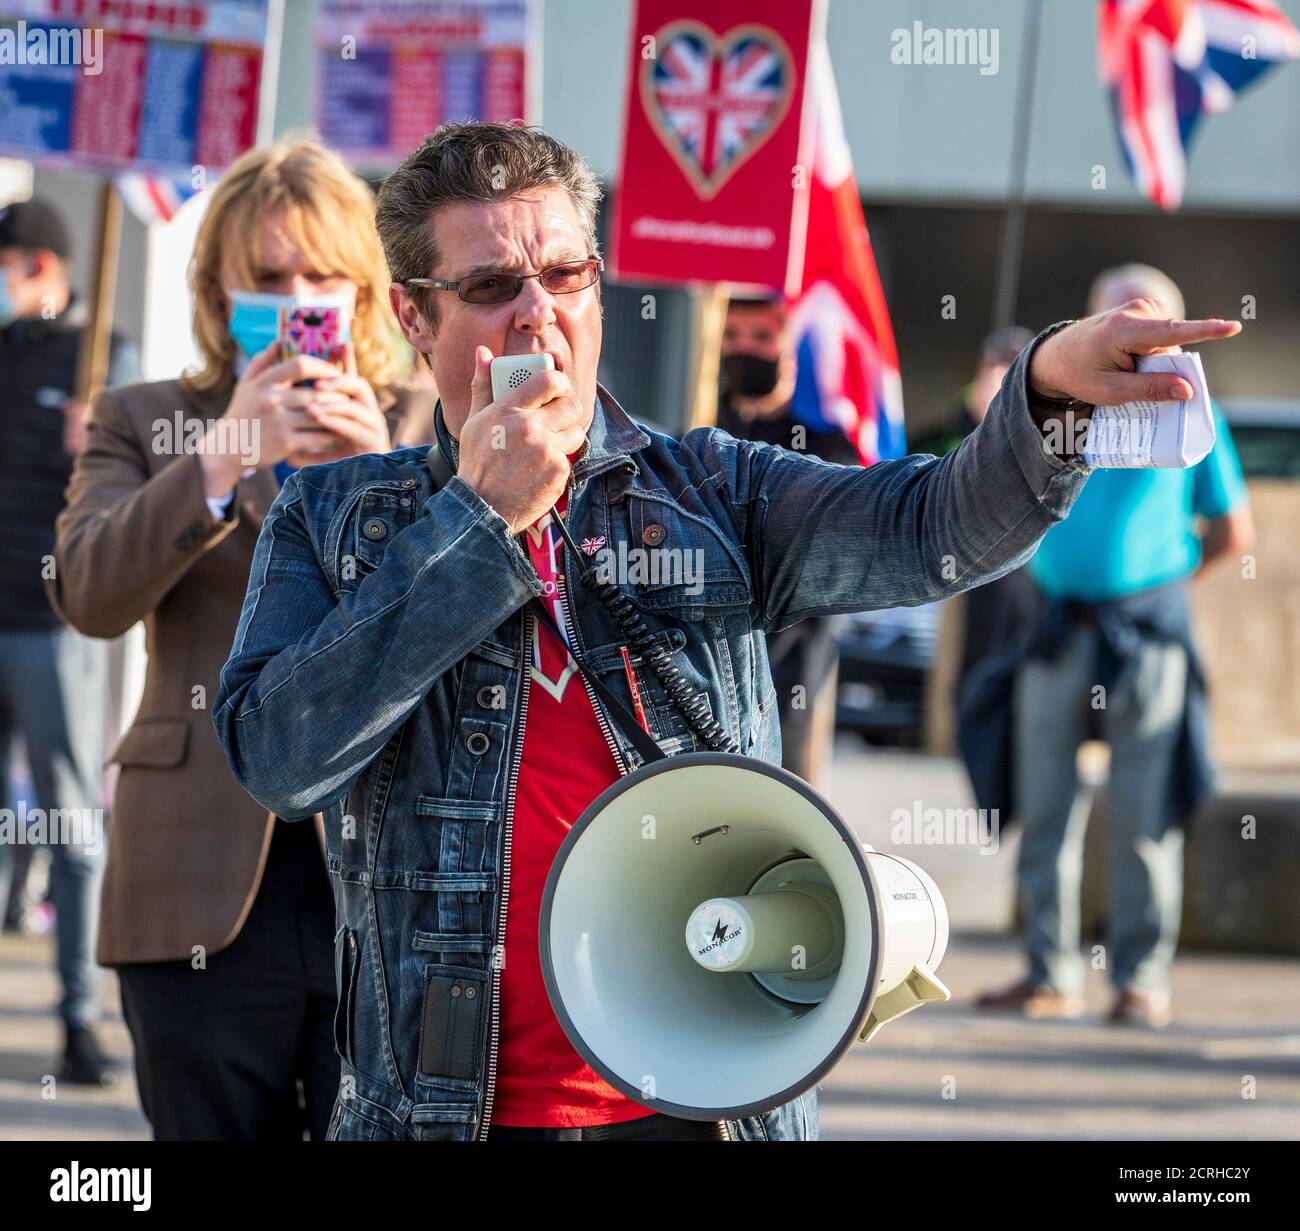 Alistair McConnachie, the leader of the Pro Unionist political pressure group called 'a Force for Good' at a political rally, Glasgow, Scotland, UK Stock Photo